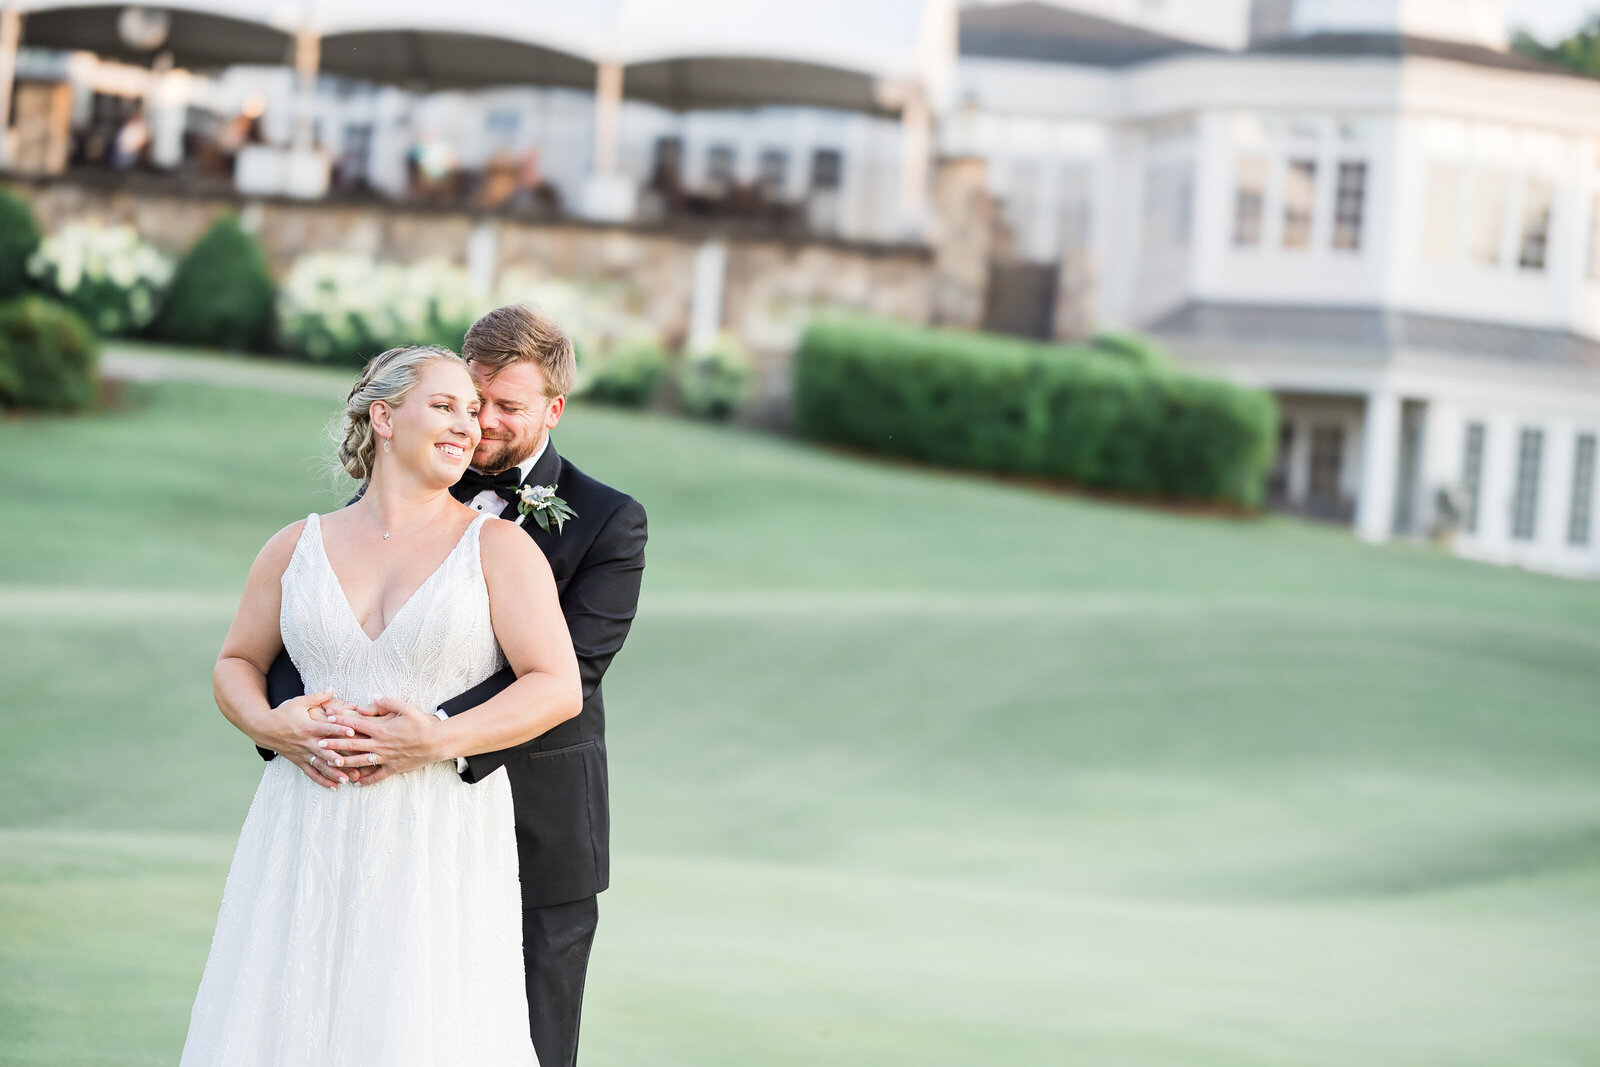 Bride and groom portrait at golf course